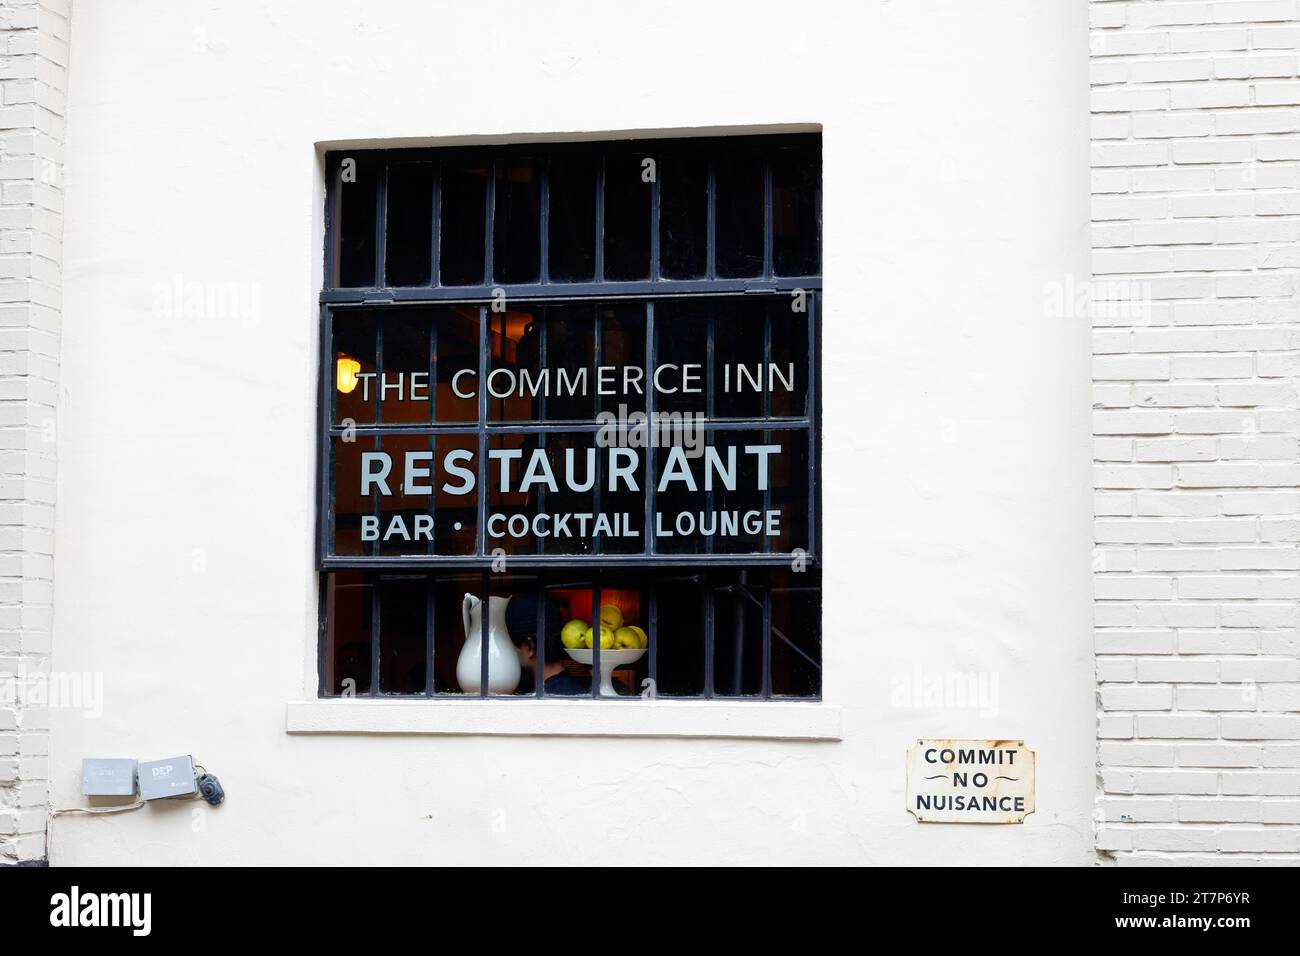 The Commerce Inn, 50 Commerce St, New York, NYC storefront photo of a restaurant in Manhattan's West Village neighborhood. Stock Photo